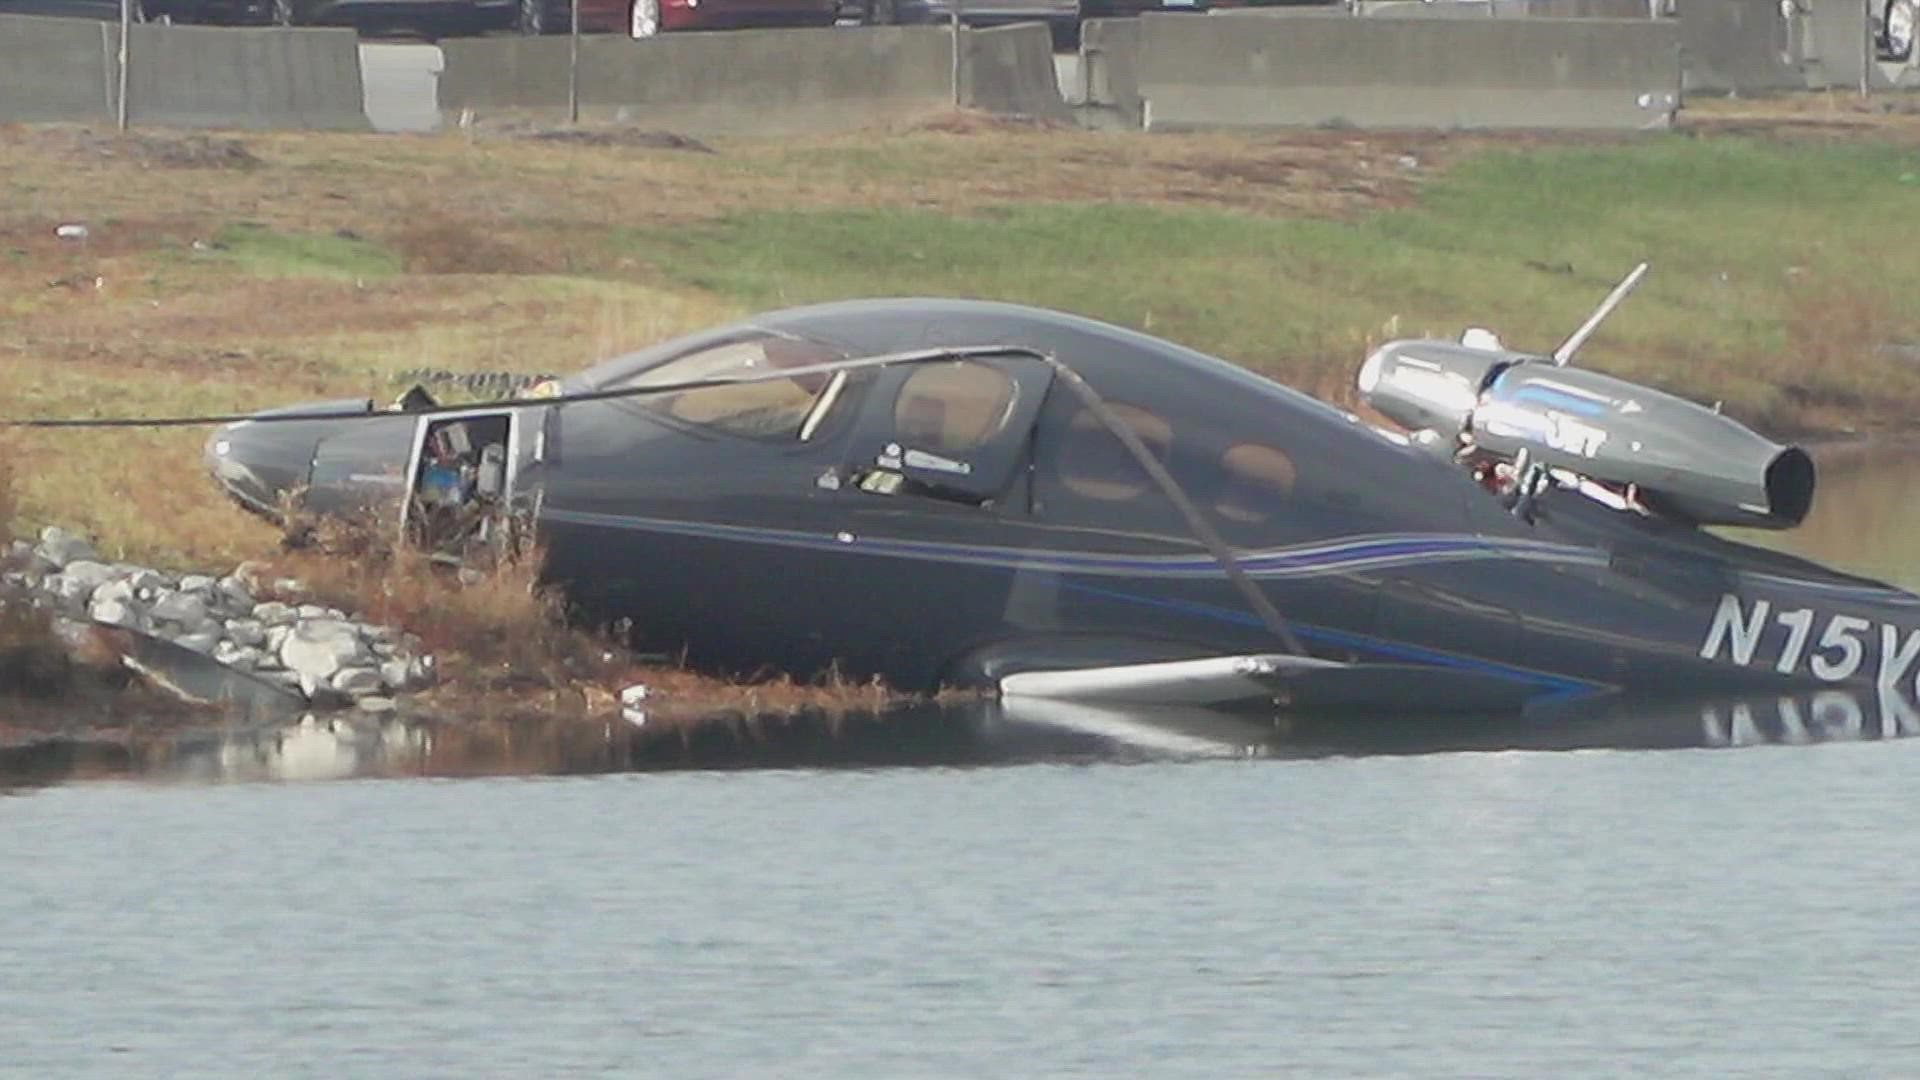 The FAA is investigating how a small plane crashed into a pond in Greenfield today.